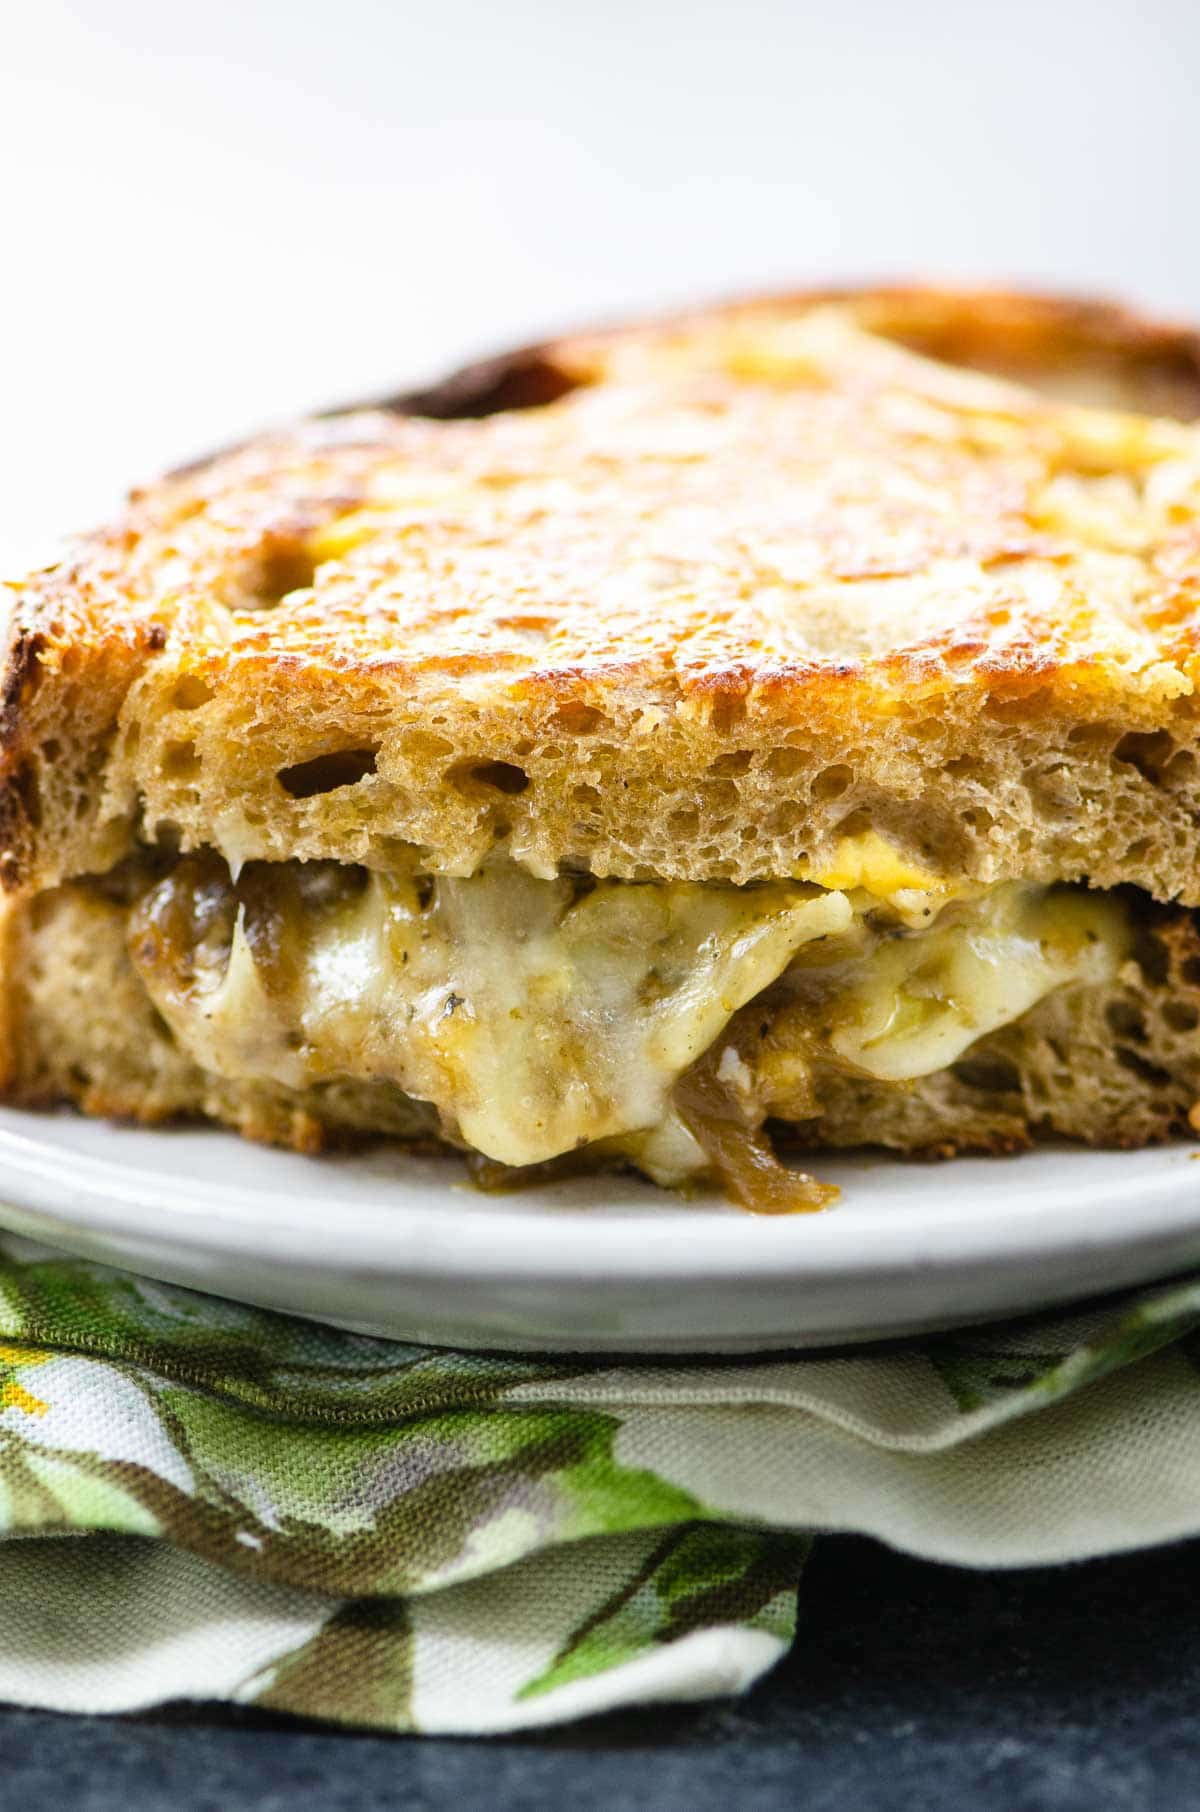 french onion grilled cheese on a plate with a napkin